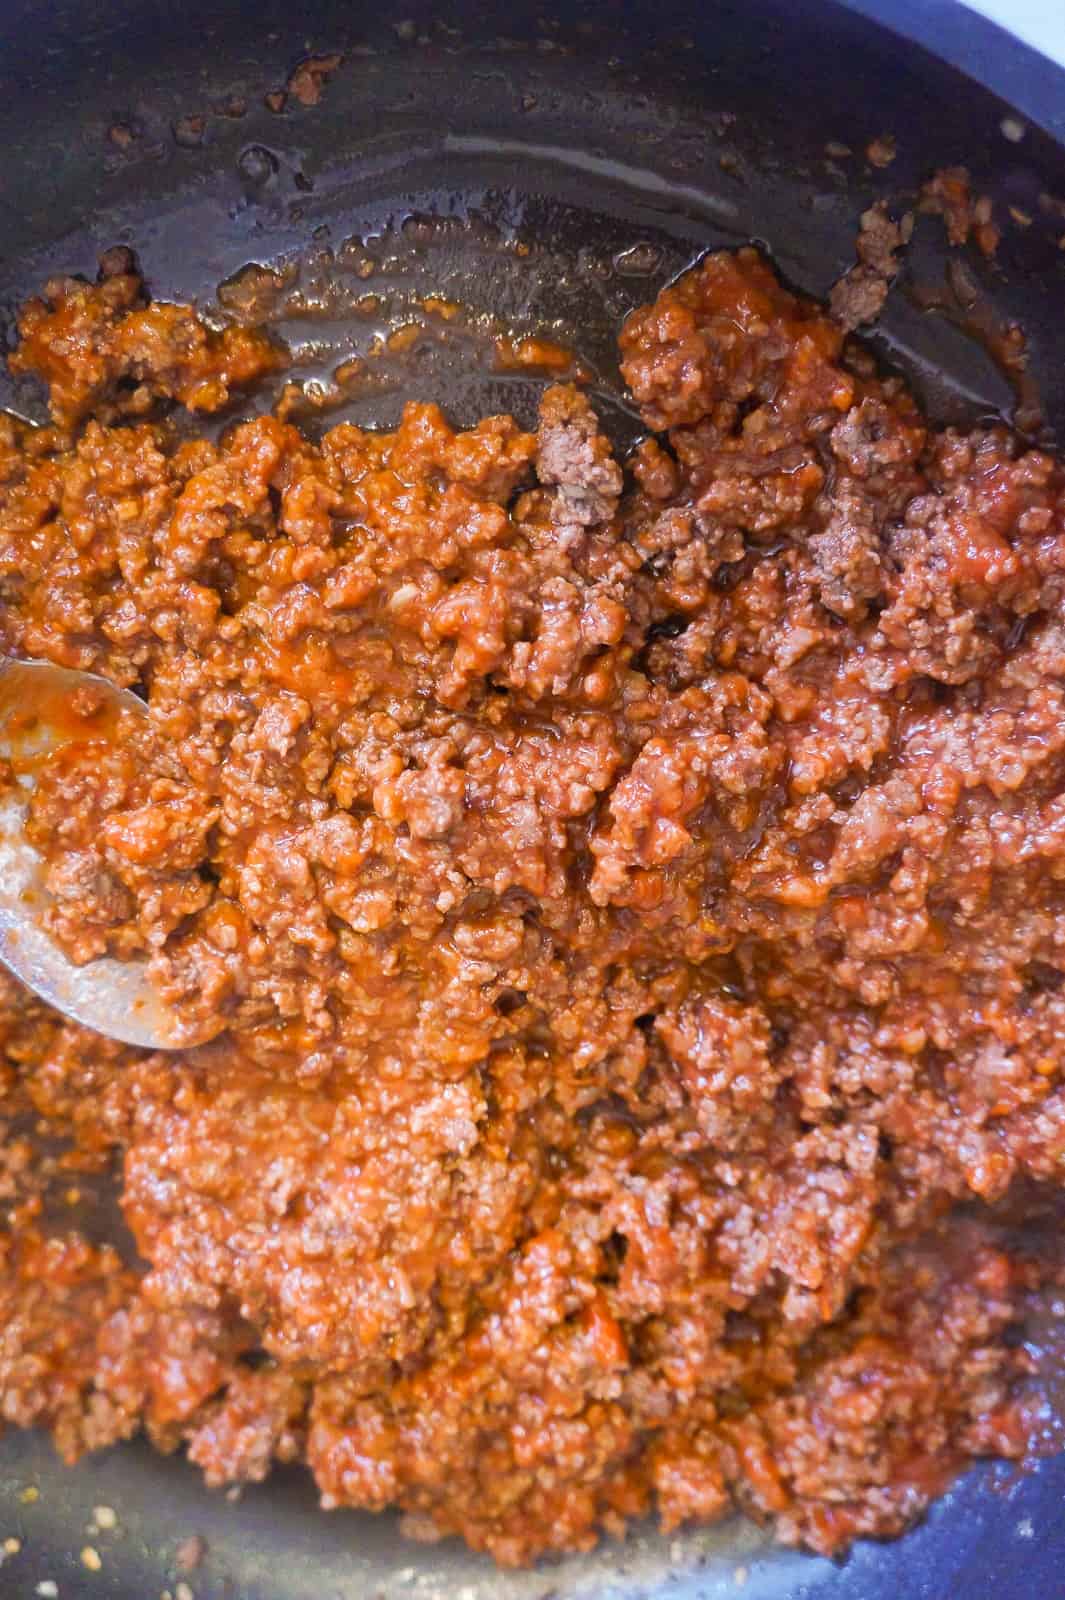 cooked ground beef and pizza sauce